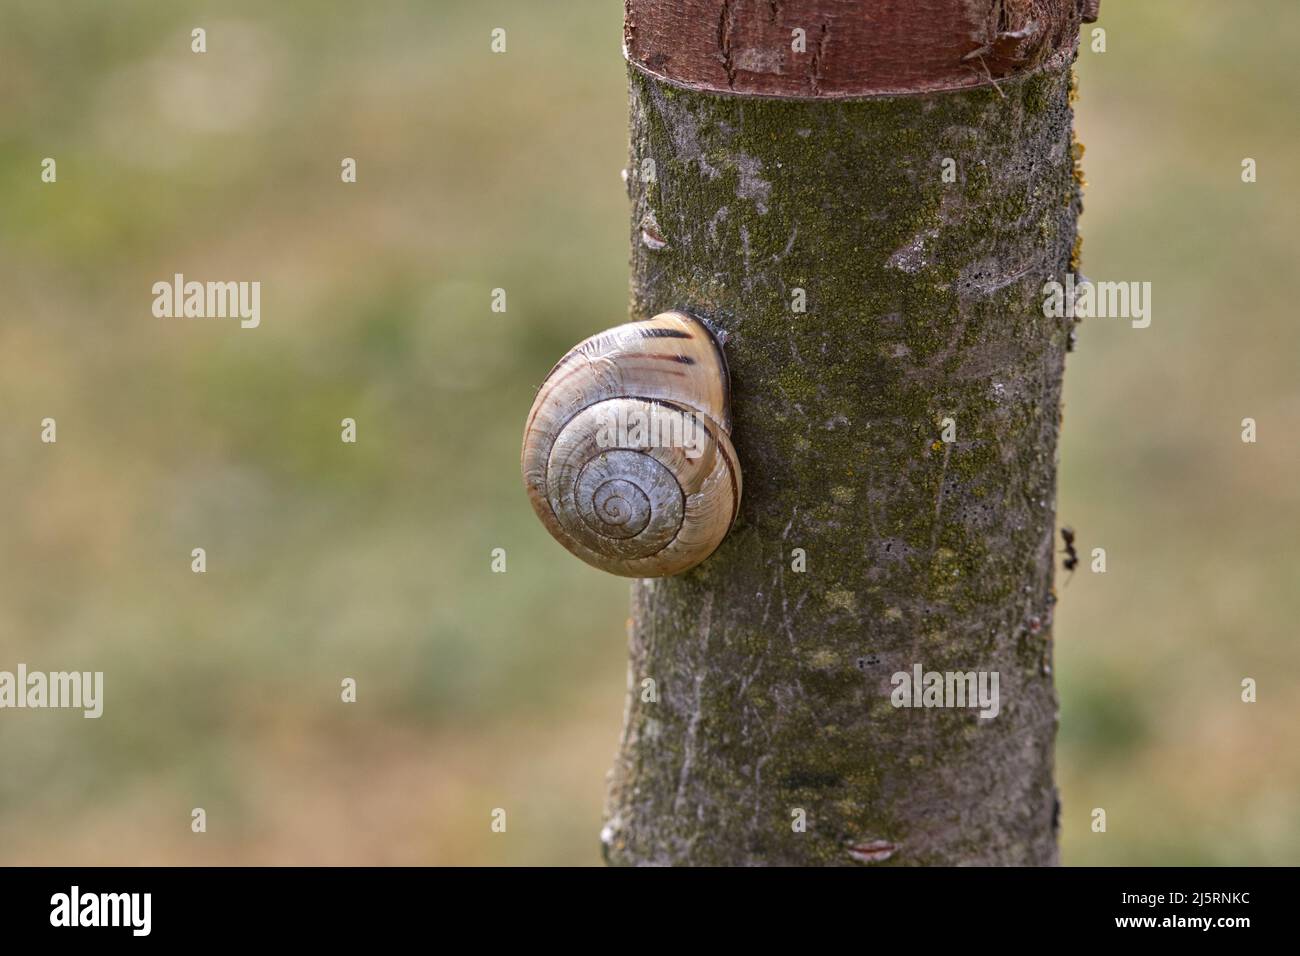 Grove cepaea, sits crawling in the house on a narrow cherry tree trunk in front of a green unfocused background, latin Cepaea nemoralis Stock Photo